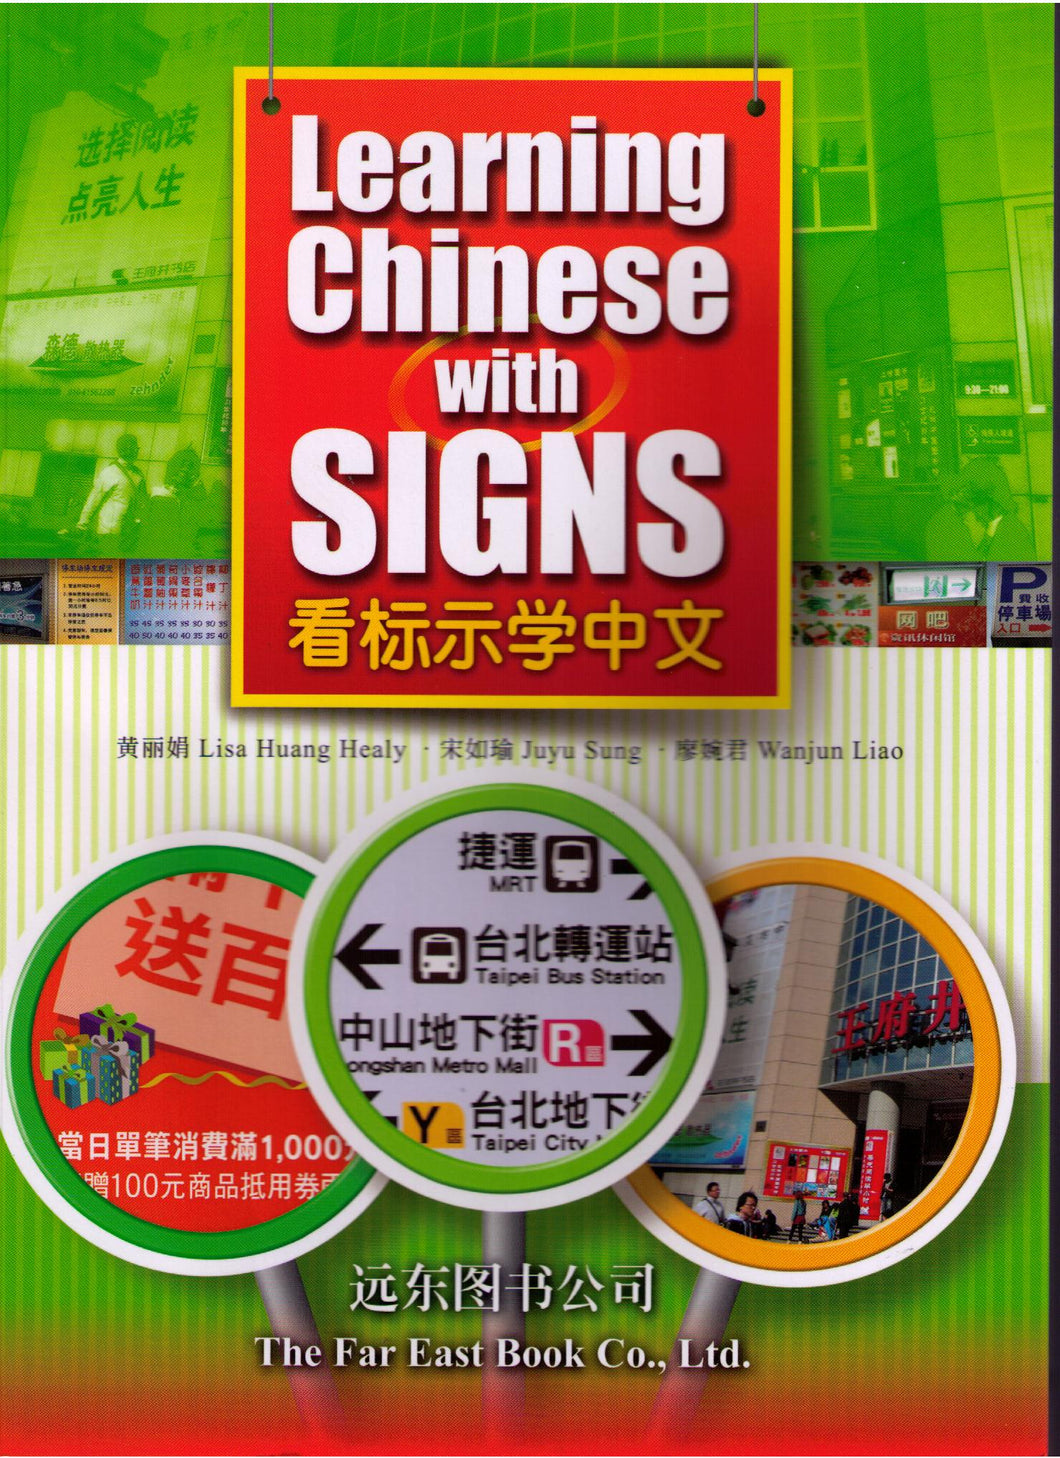 Learning Chinese with Signs 看标示学中文